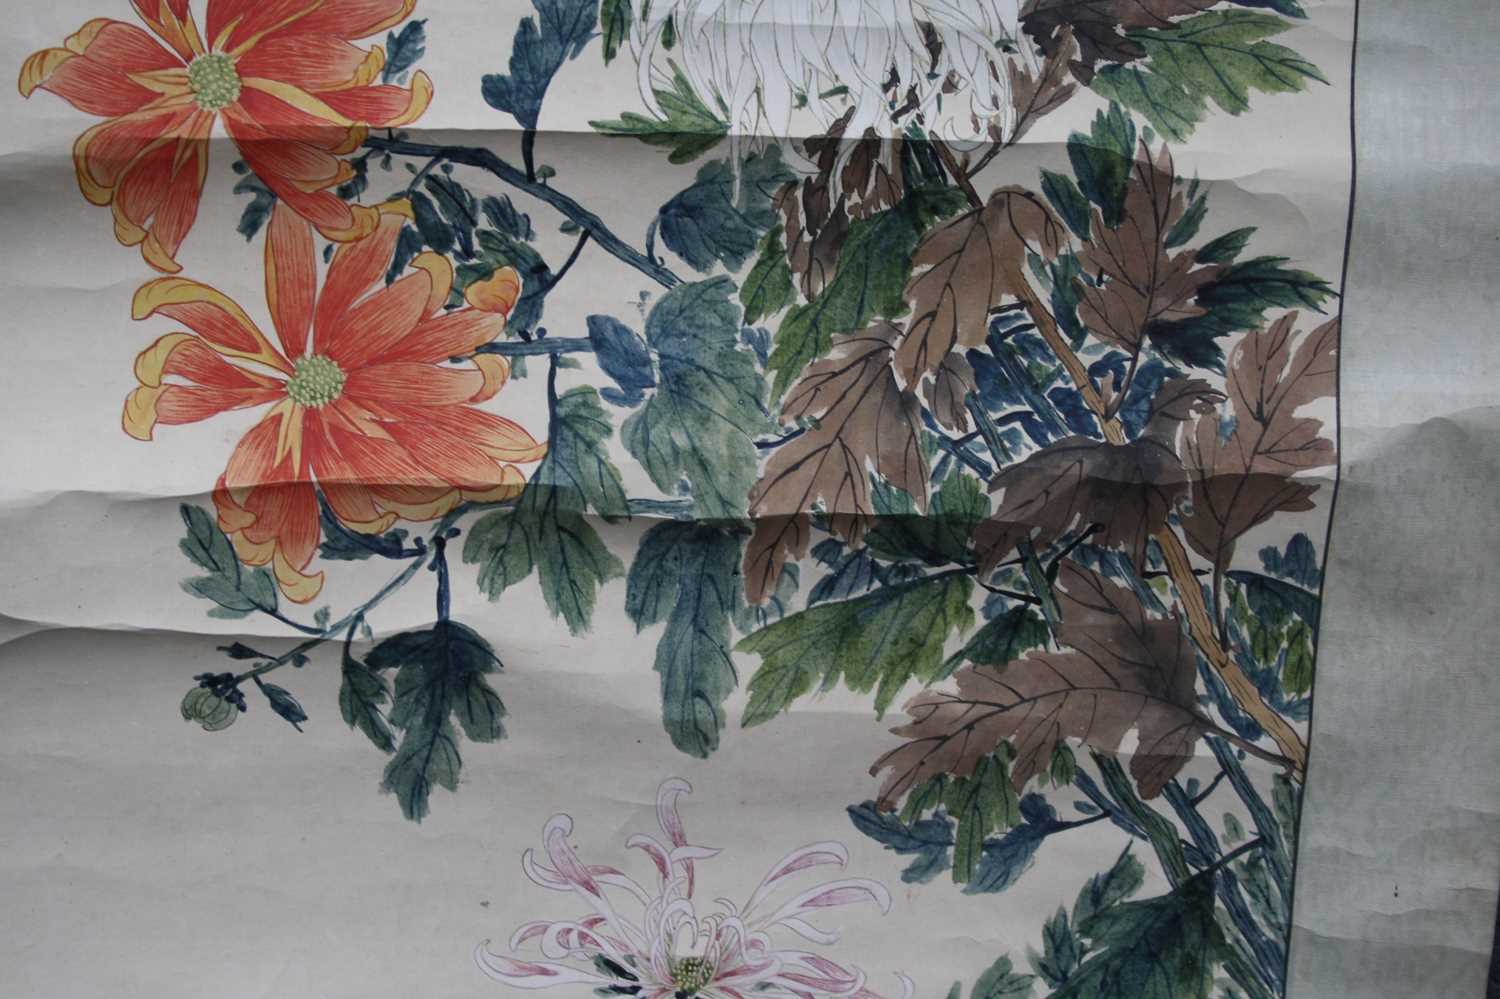 Yuan Yunyi (袁韻宜) (1920-2004) - Chrysanthemums, Republic of China scroll painting dated 1944, ink - Image 6 of 31